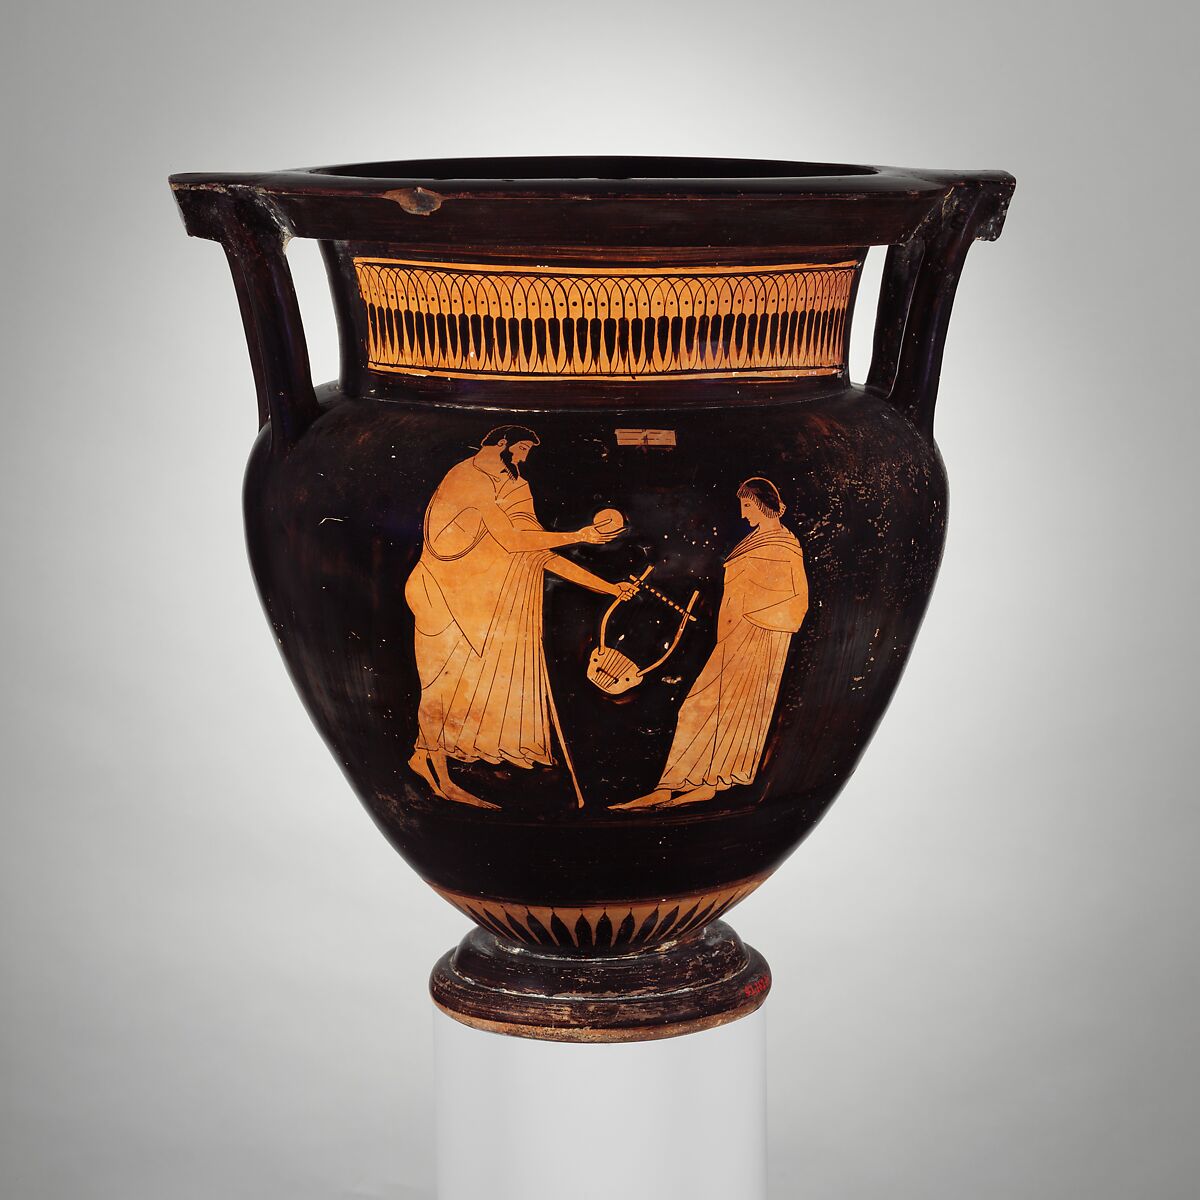 Terracotta column-krater (bowl for mixing wine and water), Attributed to the Pig Painter, Terracotta, Greek, Attic 